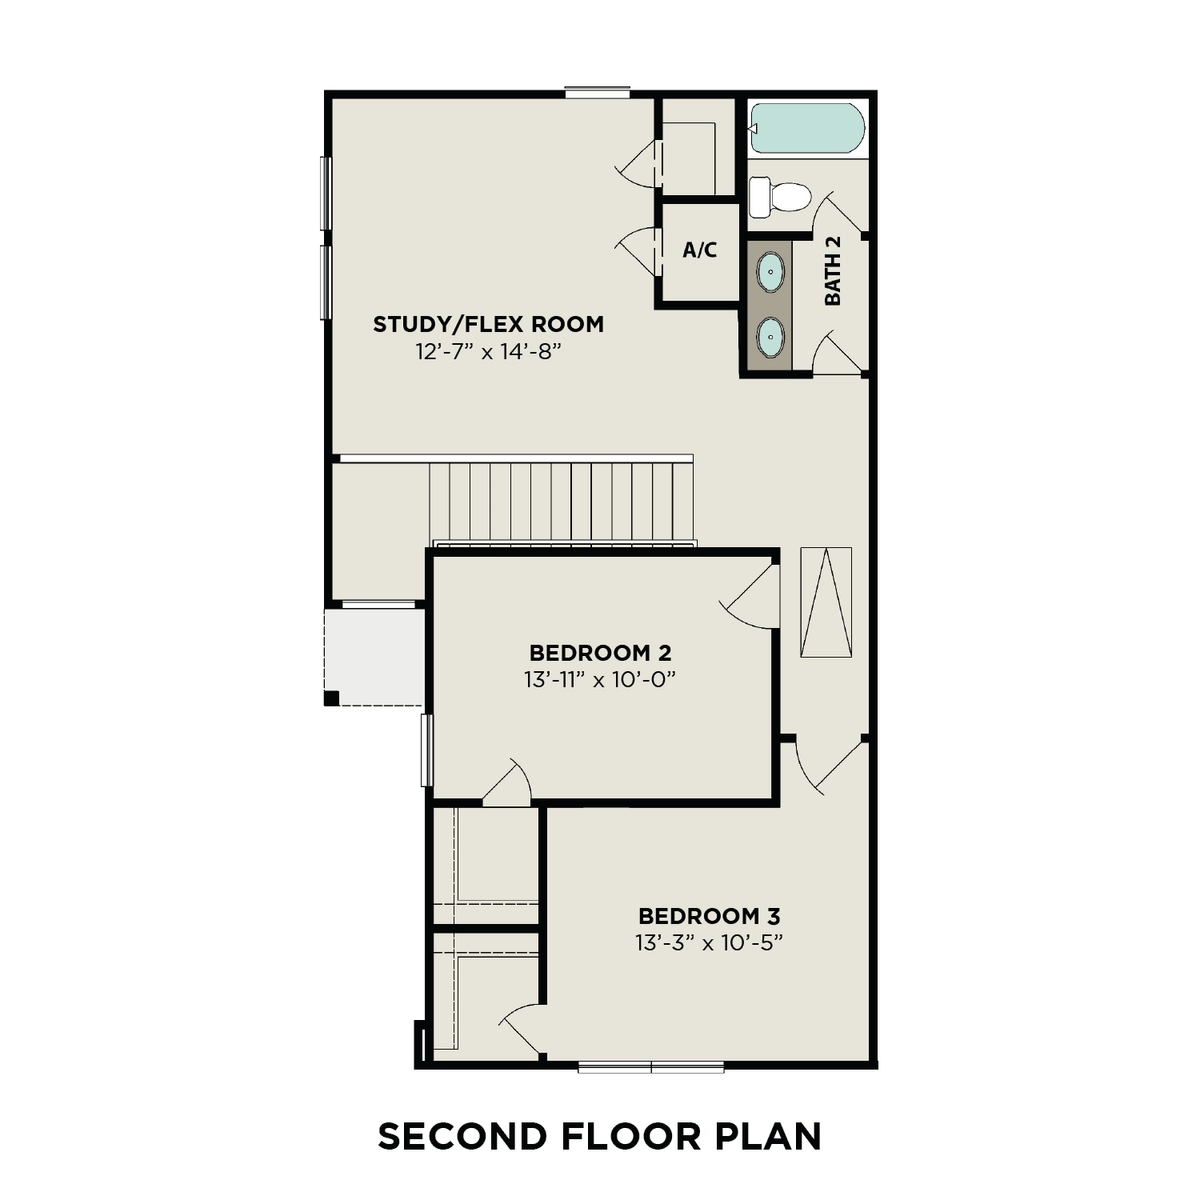 2 - The Rose A floor plan layout for 18806 Glenwood Chase Court in Davidson Homes' Haven at Kieth Harrow community.